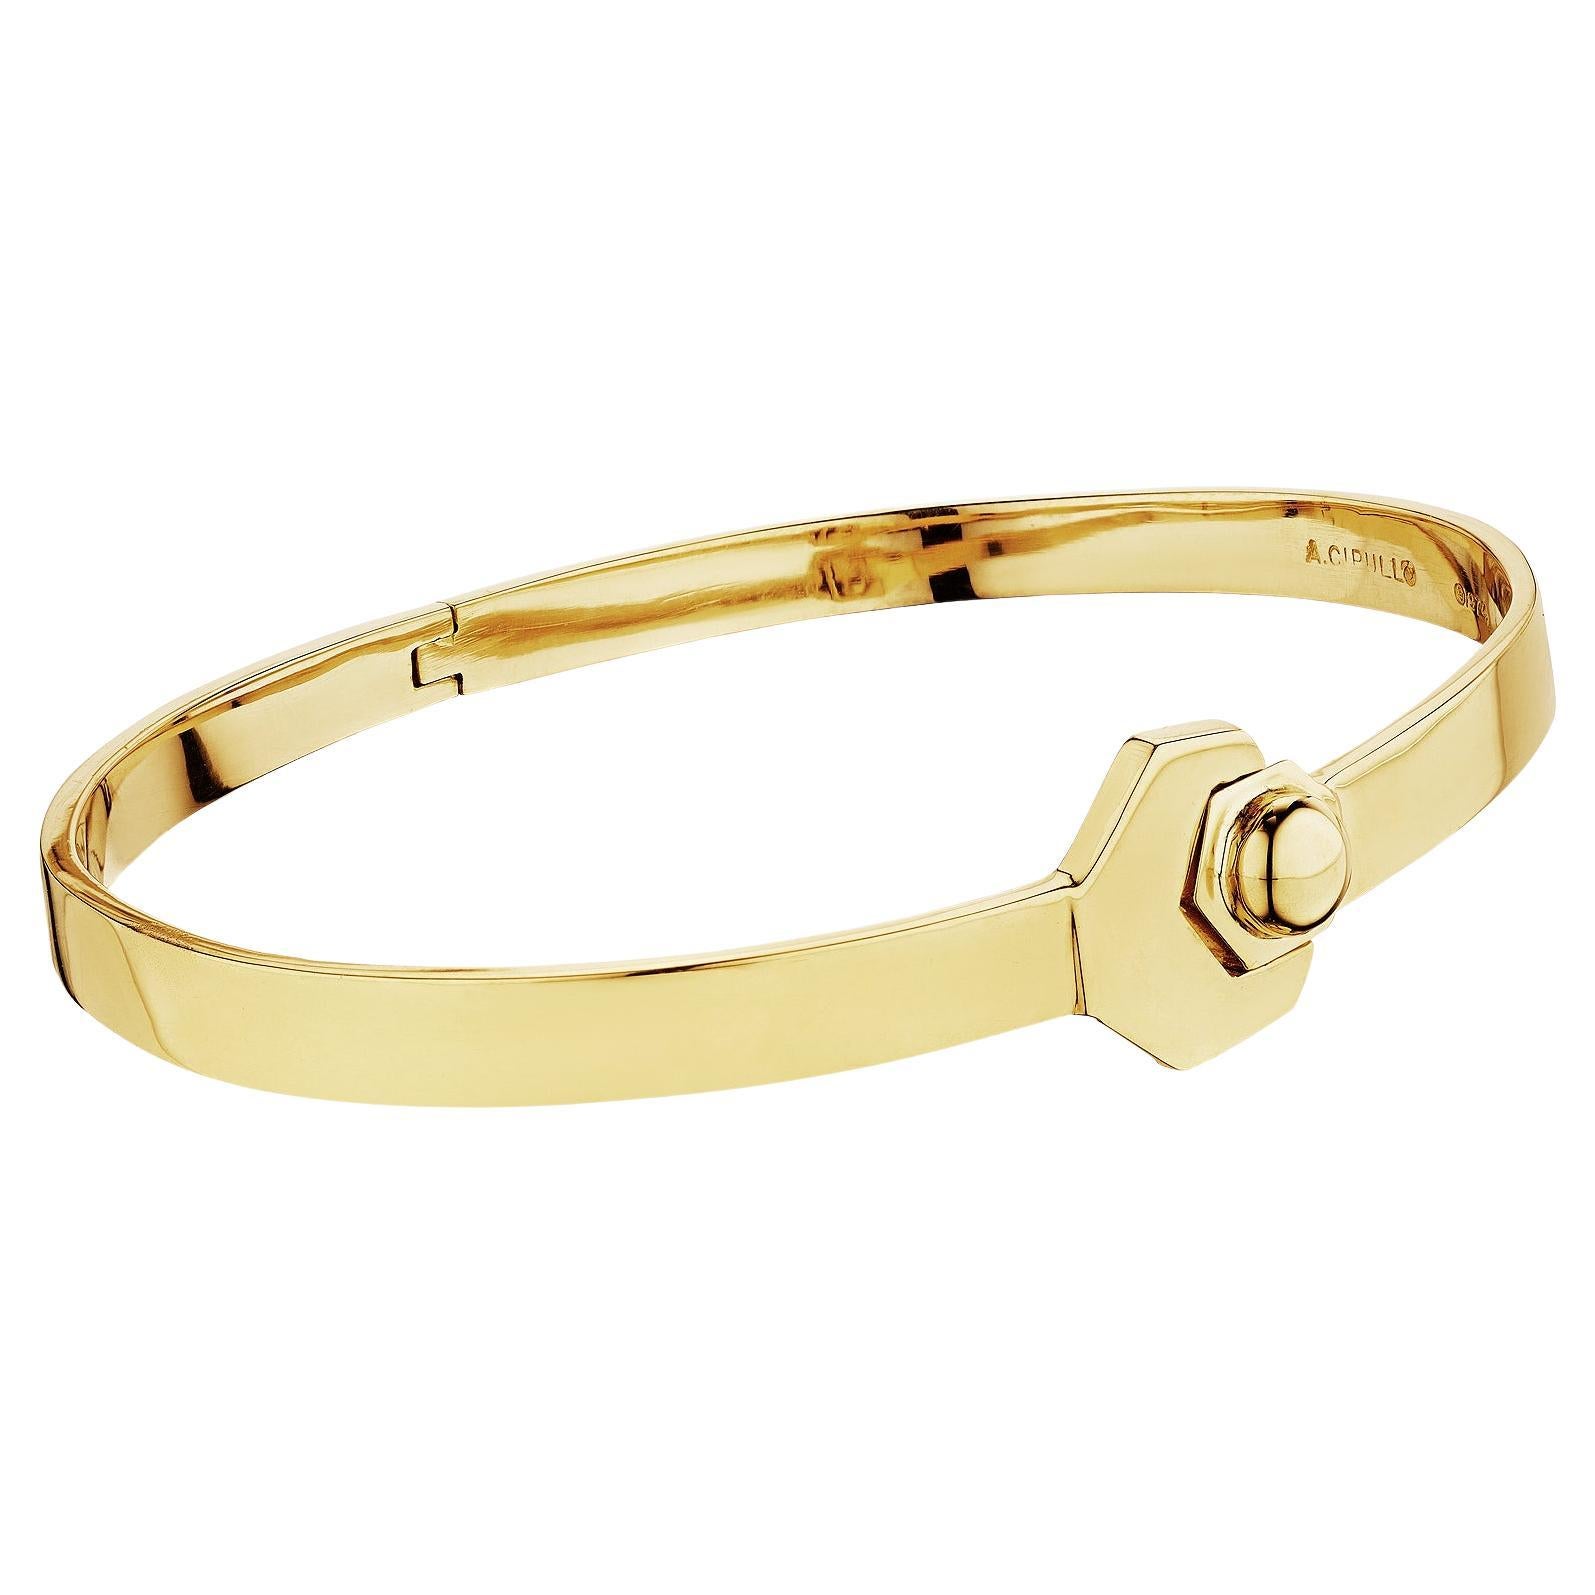 This is no monkey wrench.  Just an authentic and very rare Aldo Cipullo modernist gold 'wrench' designed bangle bracelet.  Signed A. Cipullo.  Stamped with date 1974.  18 karat yellow gold.  Fits average wrist size.  Opens with hinged back. 18 karat